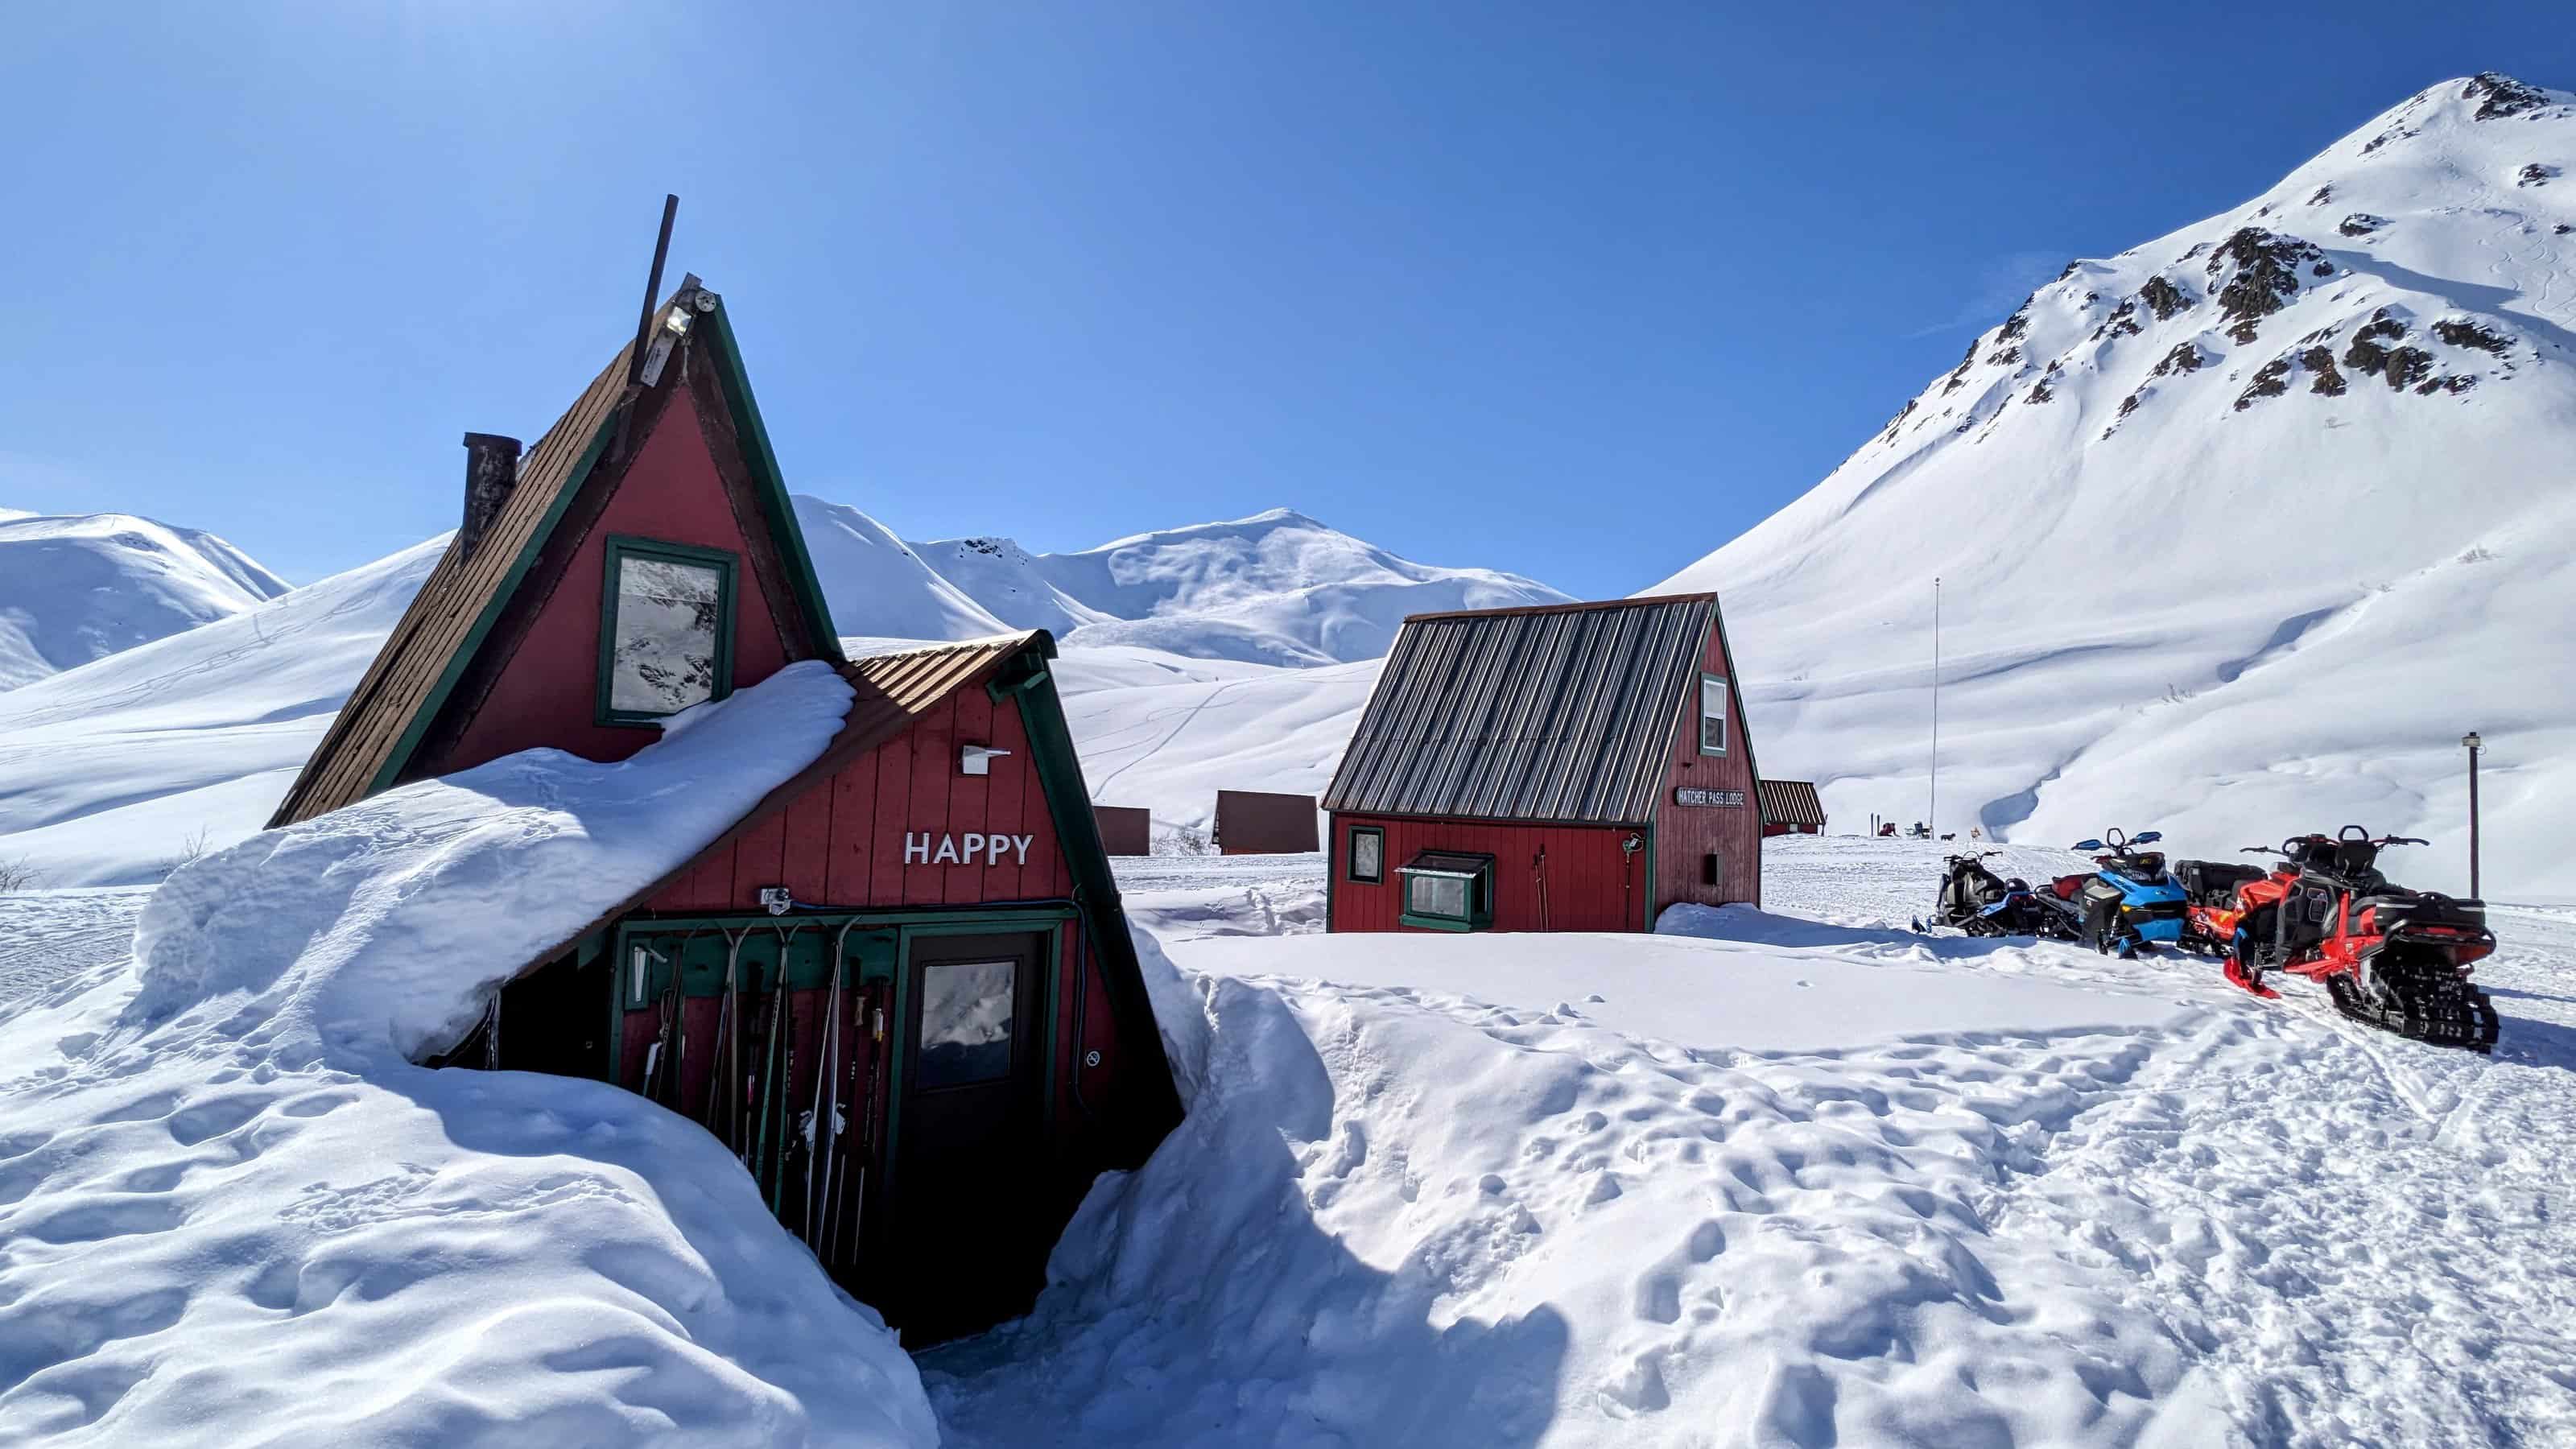 A vibrant red, A-frame cabin with the word 'HAPPY' above the door, nestled in a snowy landscape with snow-covered mountains in the background and a row of parked snowmobiles to the side under a clear blue sky